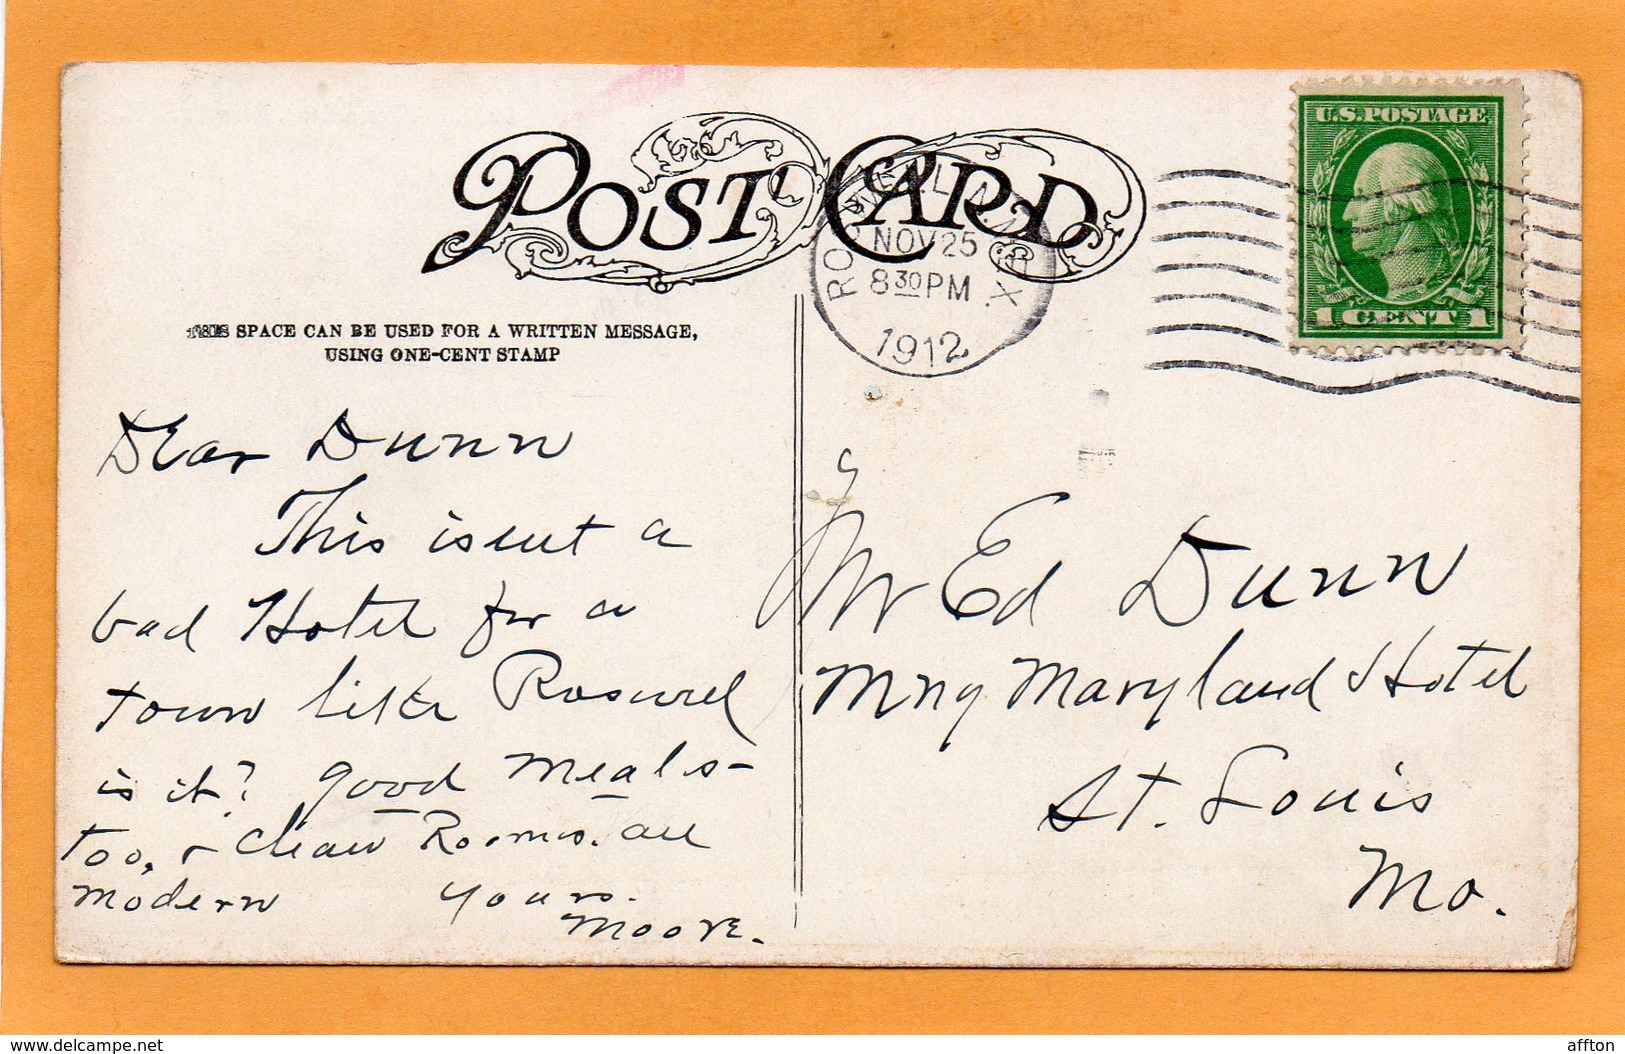 Gilkeson Hotel Roswell NM 1912 Postcard - Roswell